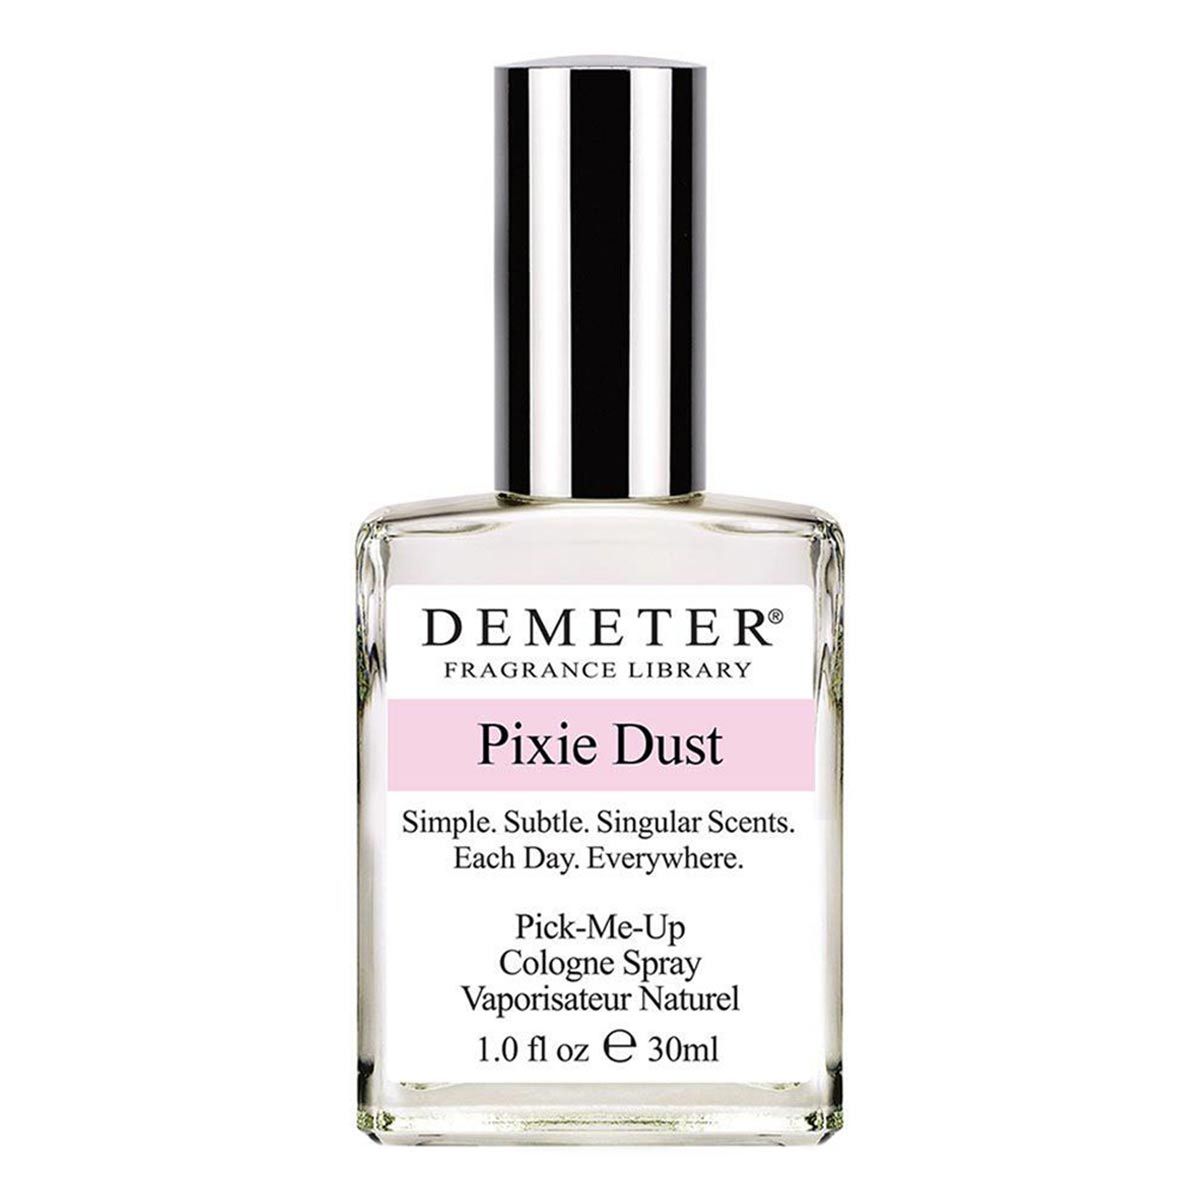 Primary image of Pixie Dust Cologne Spray